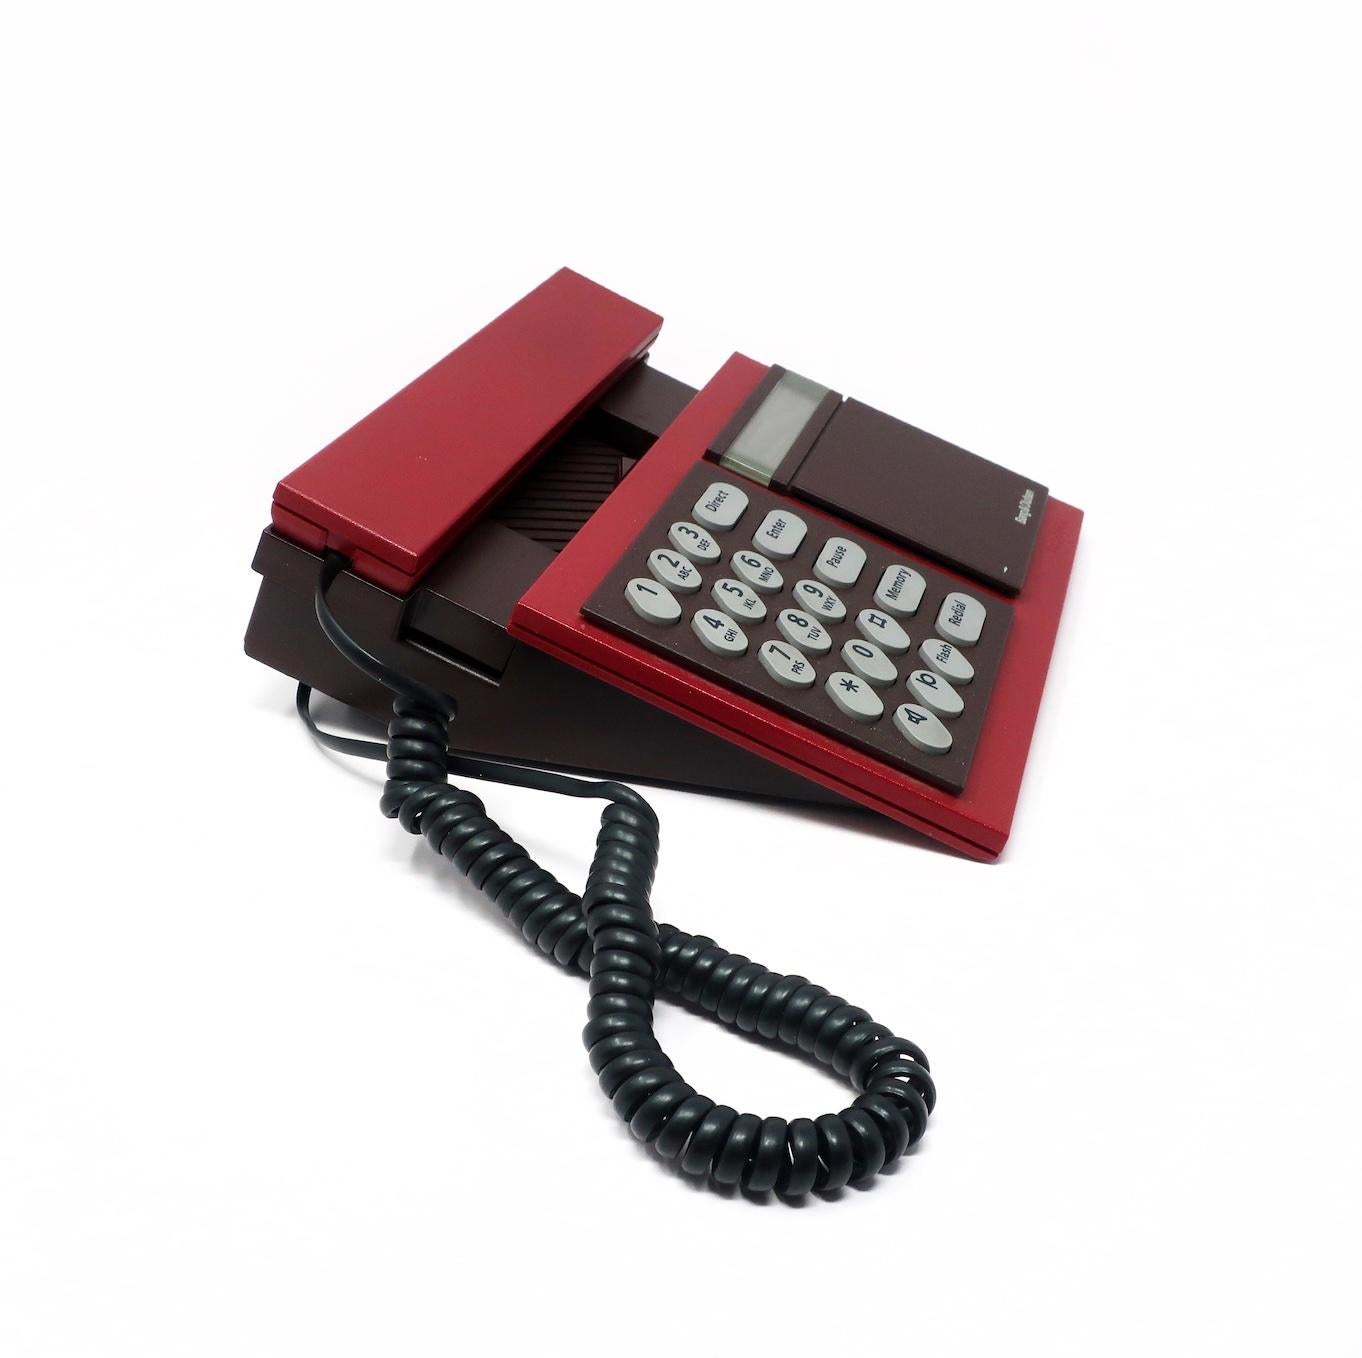 Designed in 1986 Lone and Gideon Lindinger-Lowy, the Bang & Olufsen Beocom 2000 telephone is Danish design at its finest, and the epitome of 1980s high-tech and high design. It has a maroon handset and body and gray buttons.

In good vintage